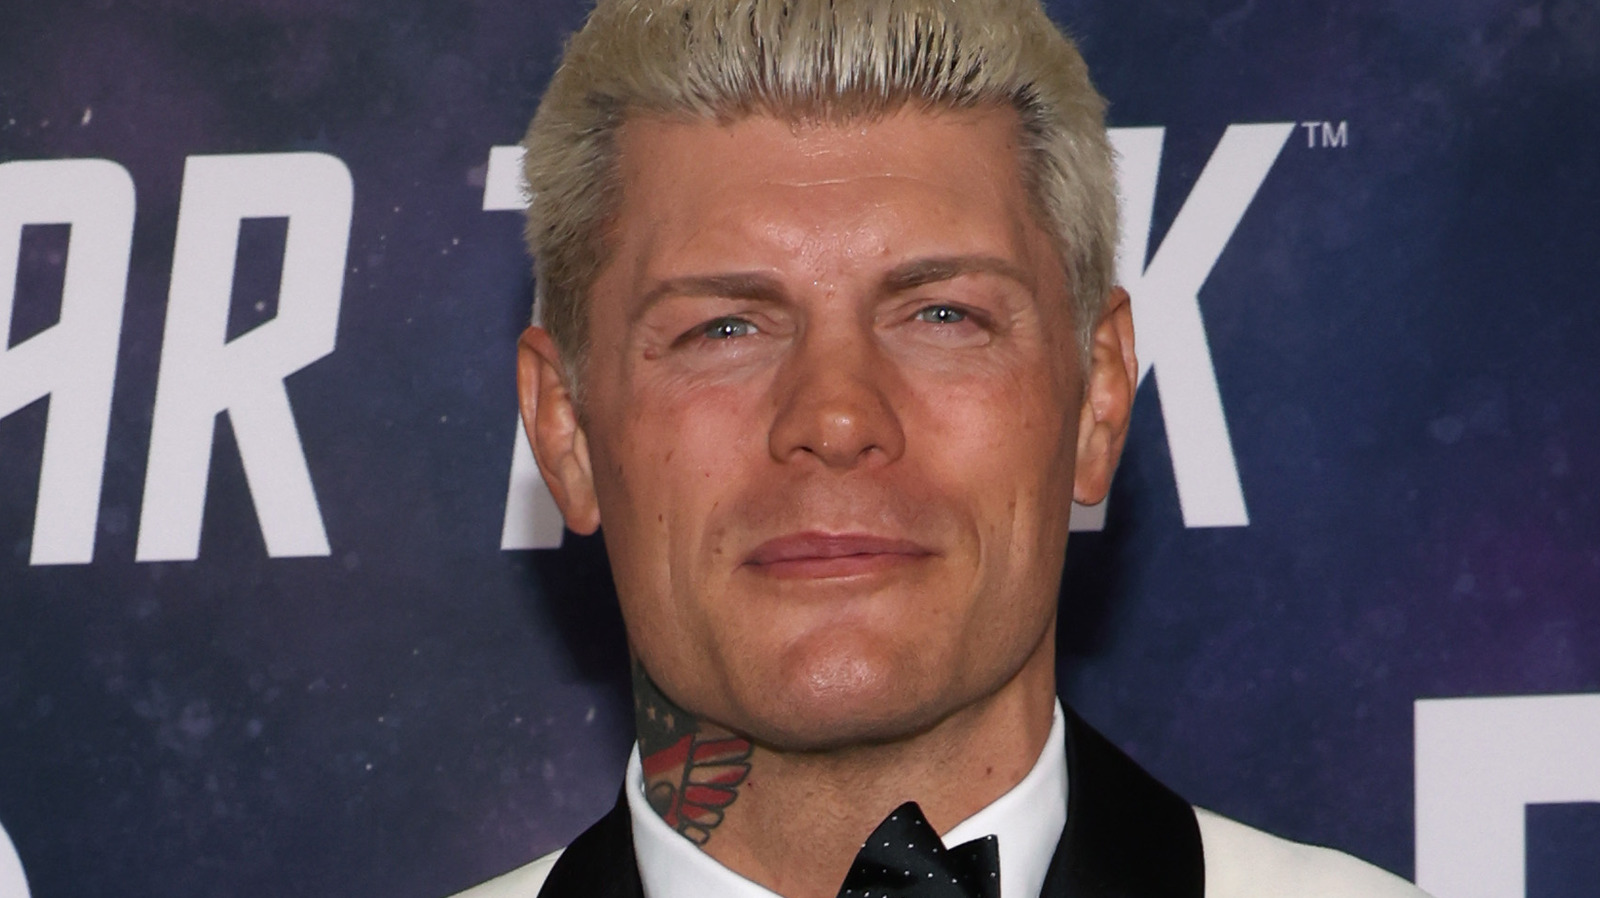 Cody Rhodes Mentions Rubber Chicken, Challenges Brock Lesnar To Match ...